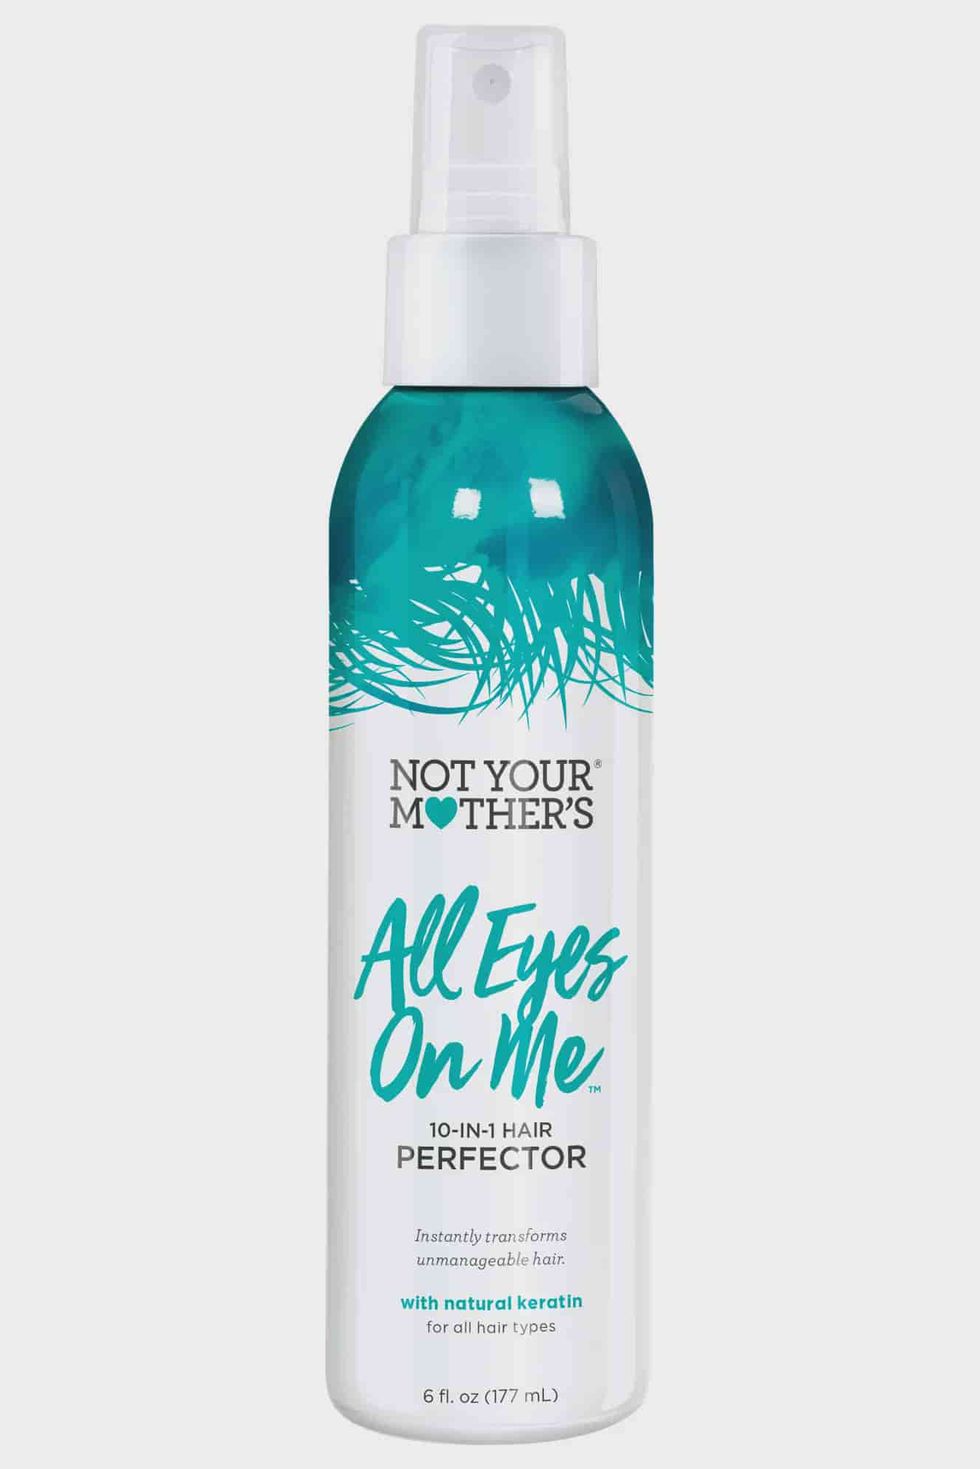 All Eyes On Me 10-in-1 Hair Perfector